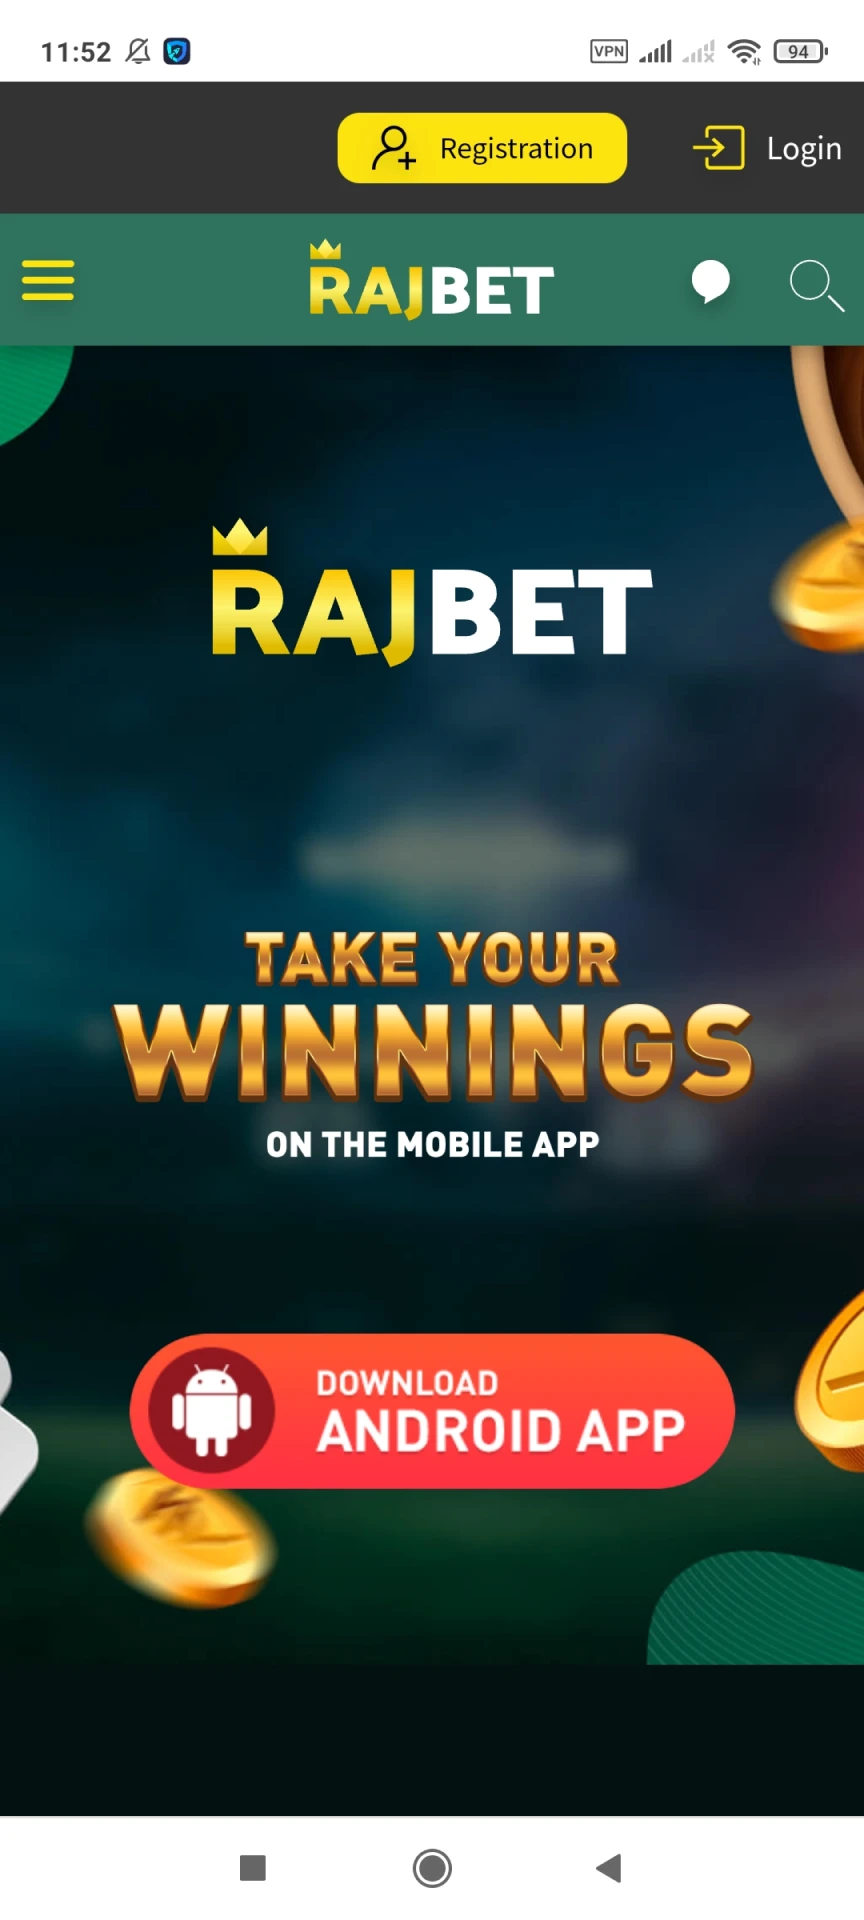 You need to start downloading the Rajbet app for Android.